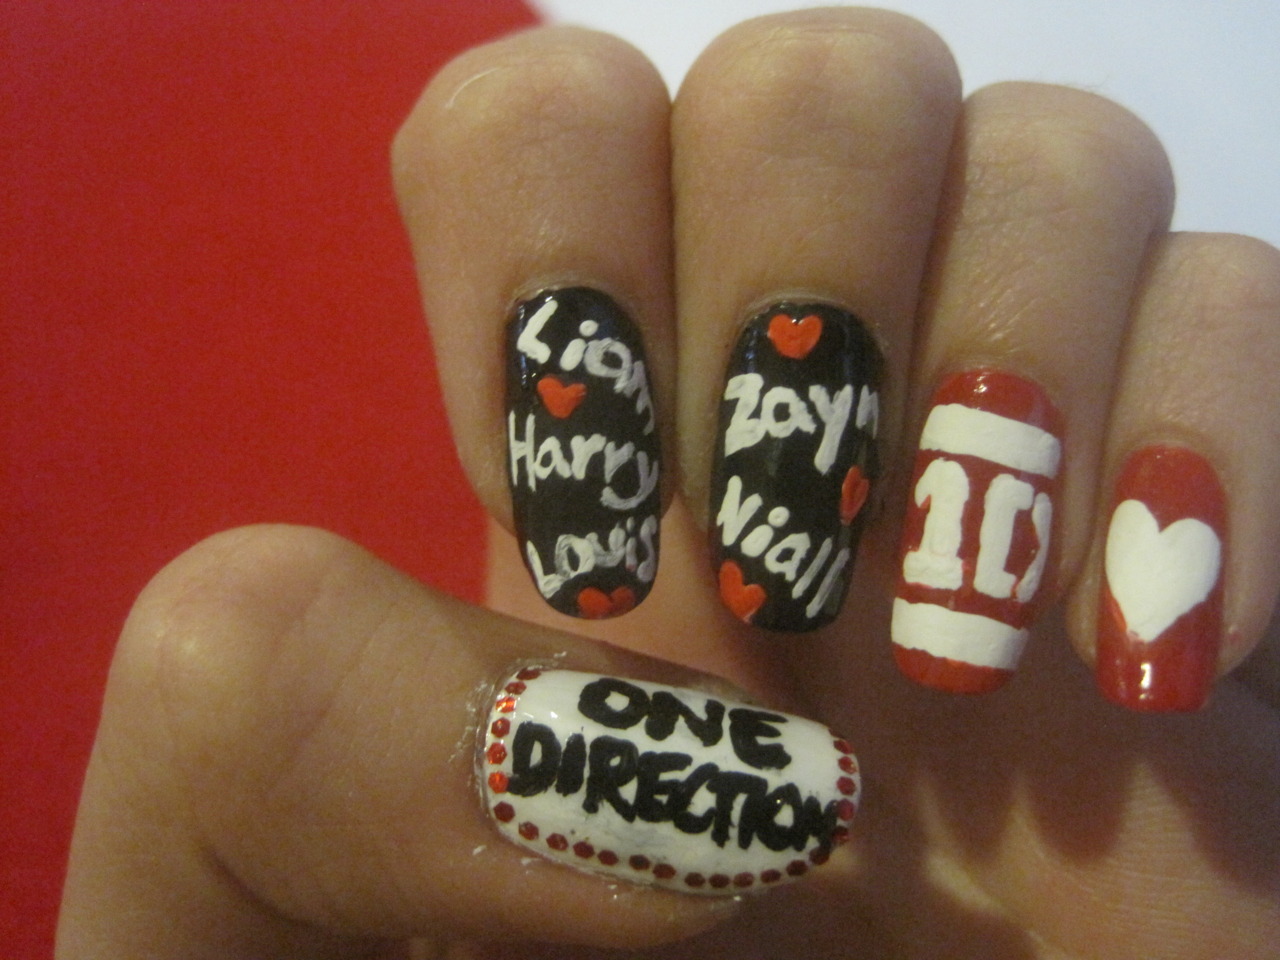 My 2 One Direction nail art designs :D trying to upload both ASAP